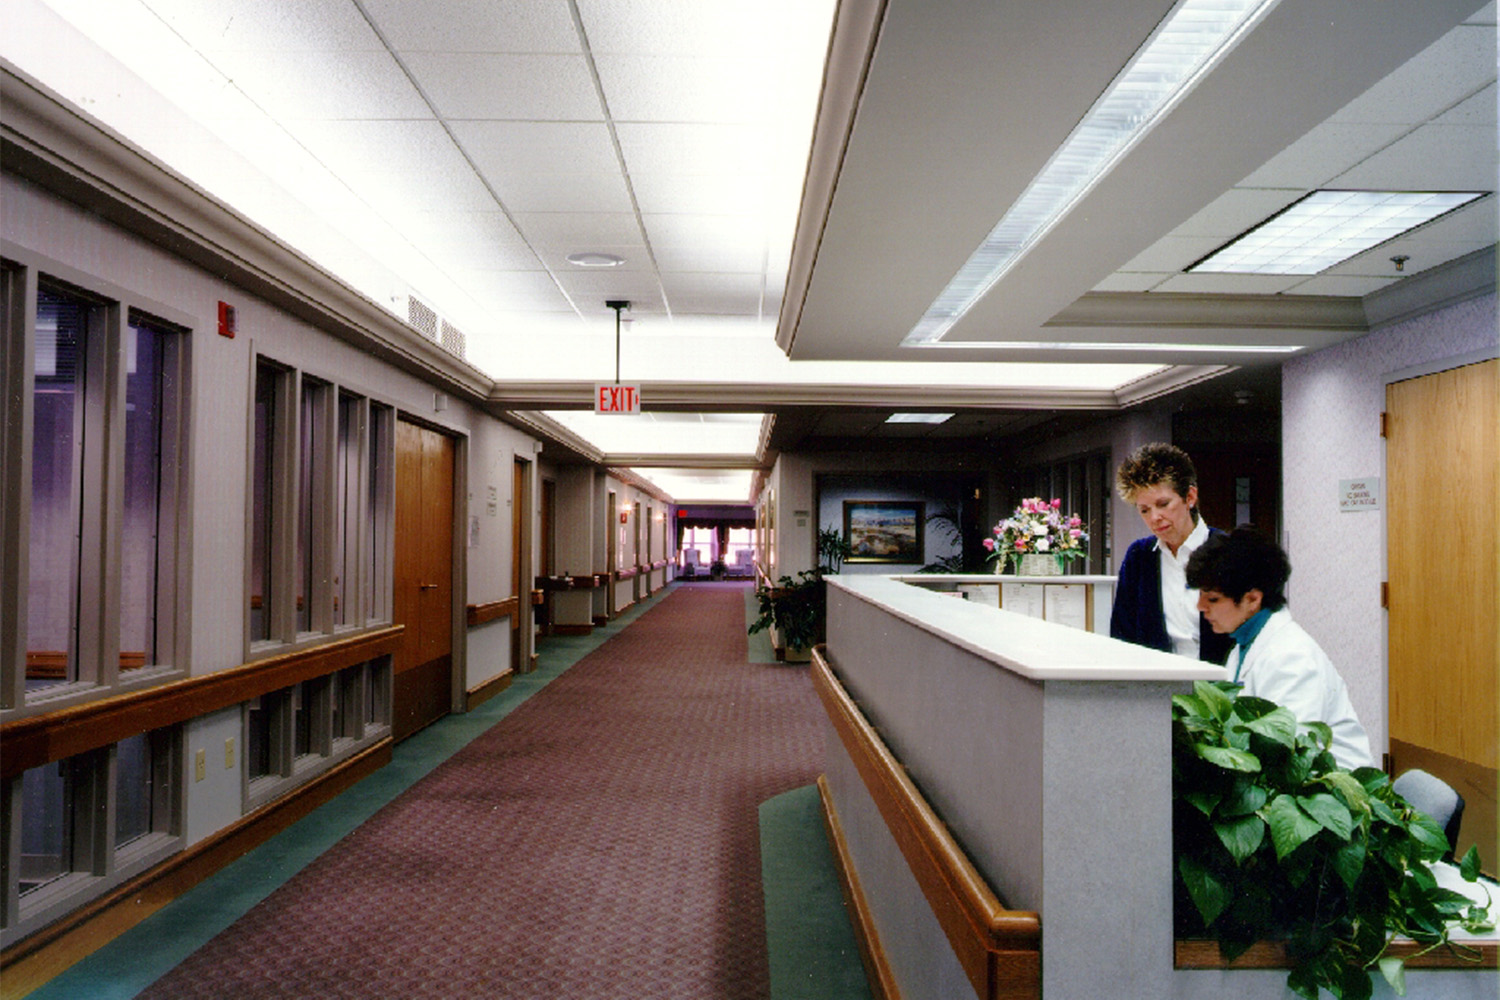 Longview of hallway at Alzheimer's care facility, with nurses working by desk